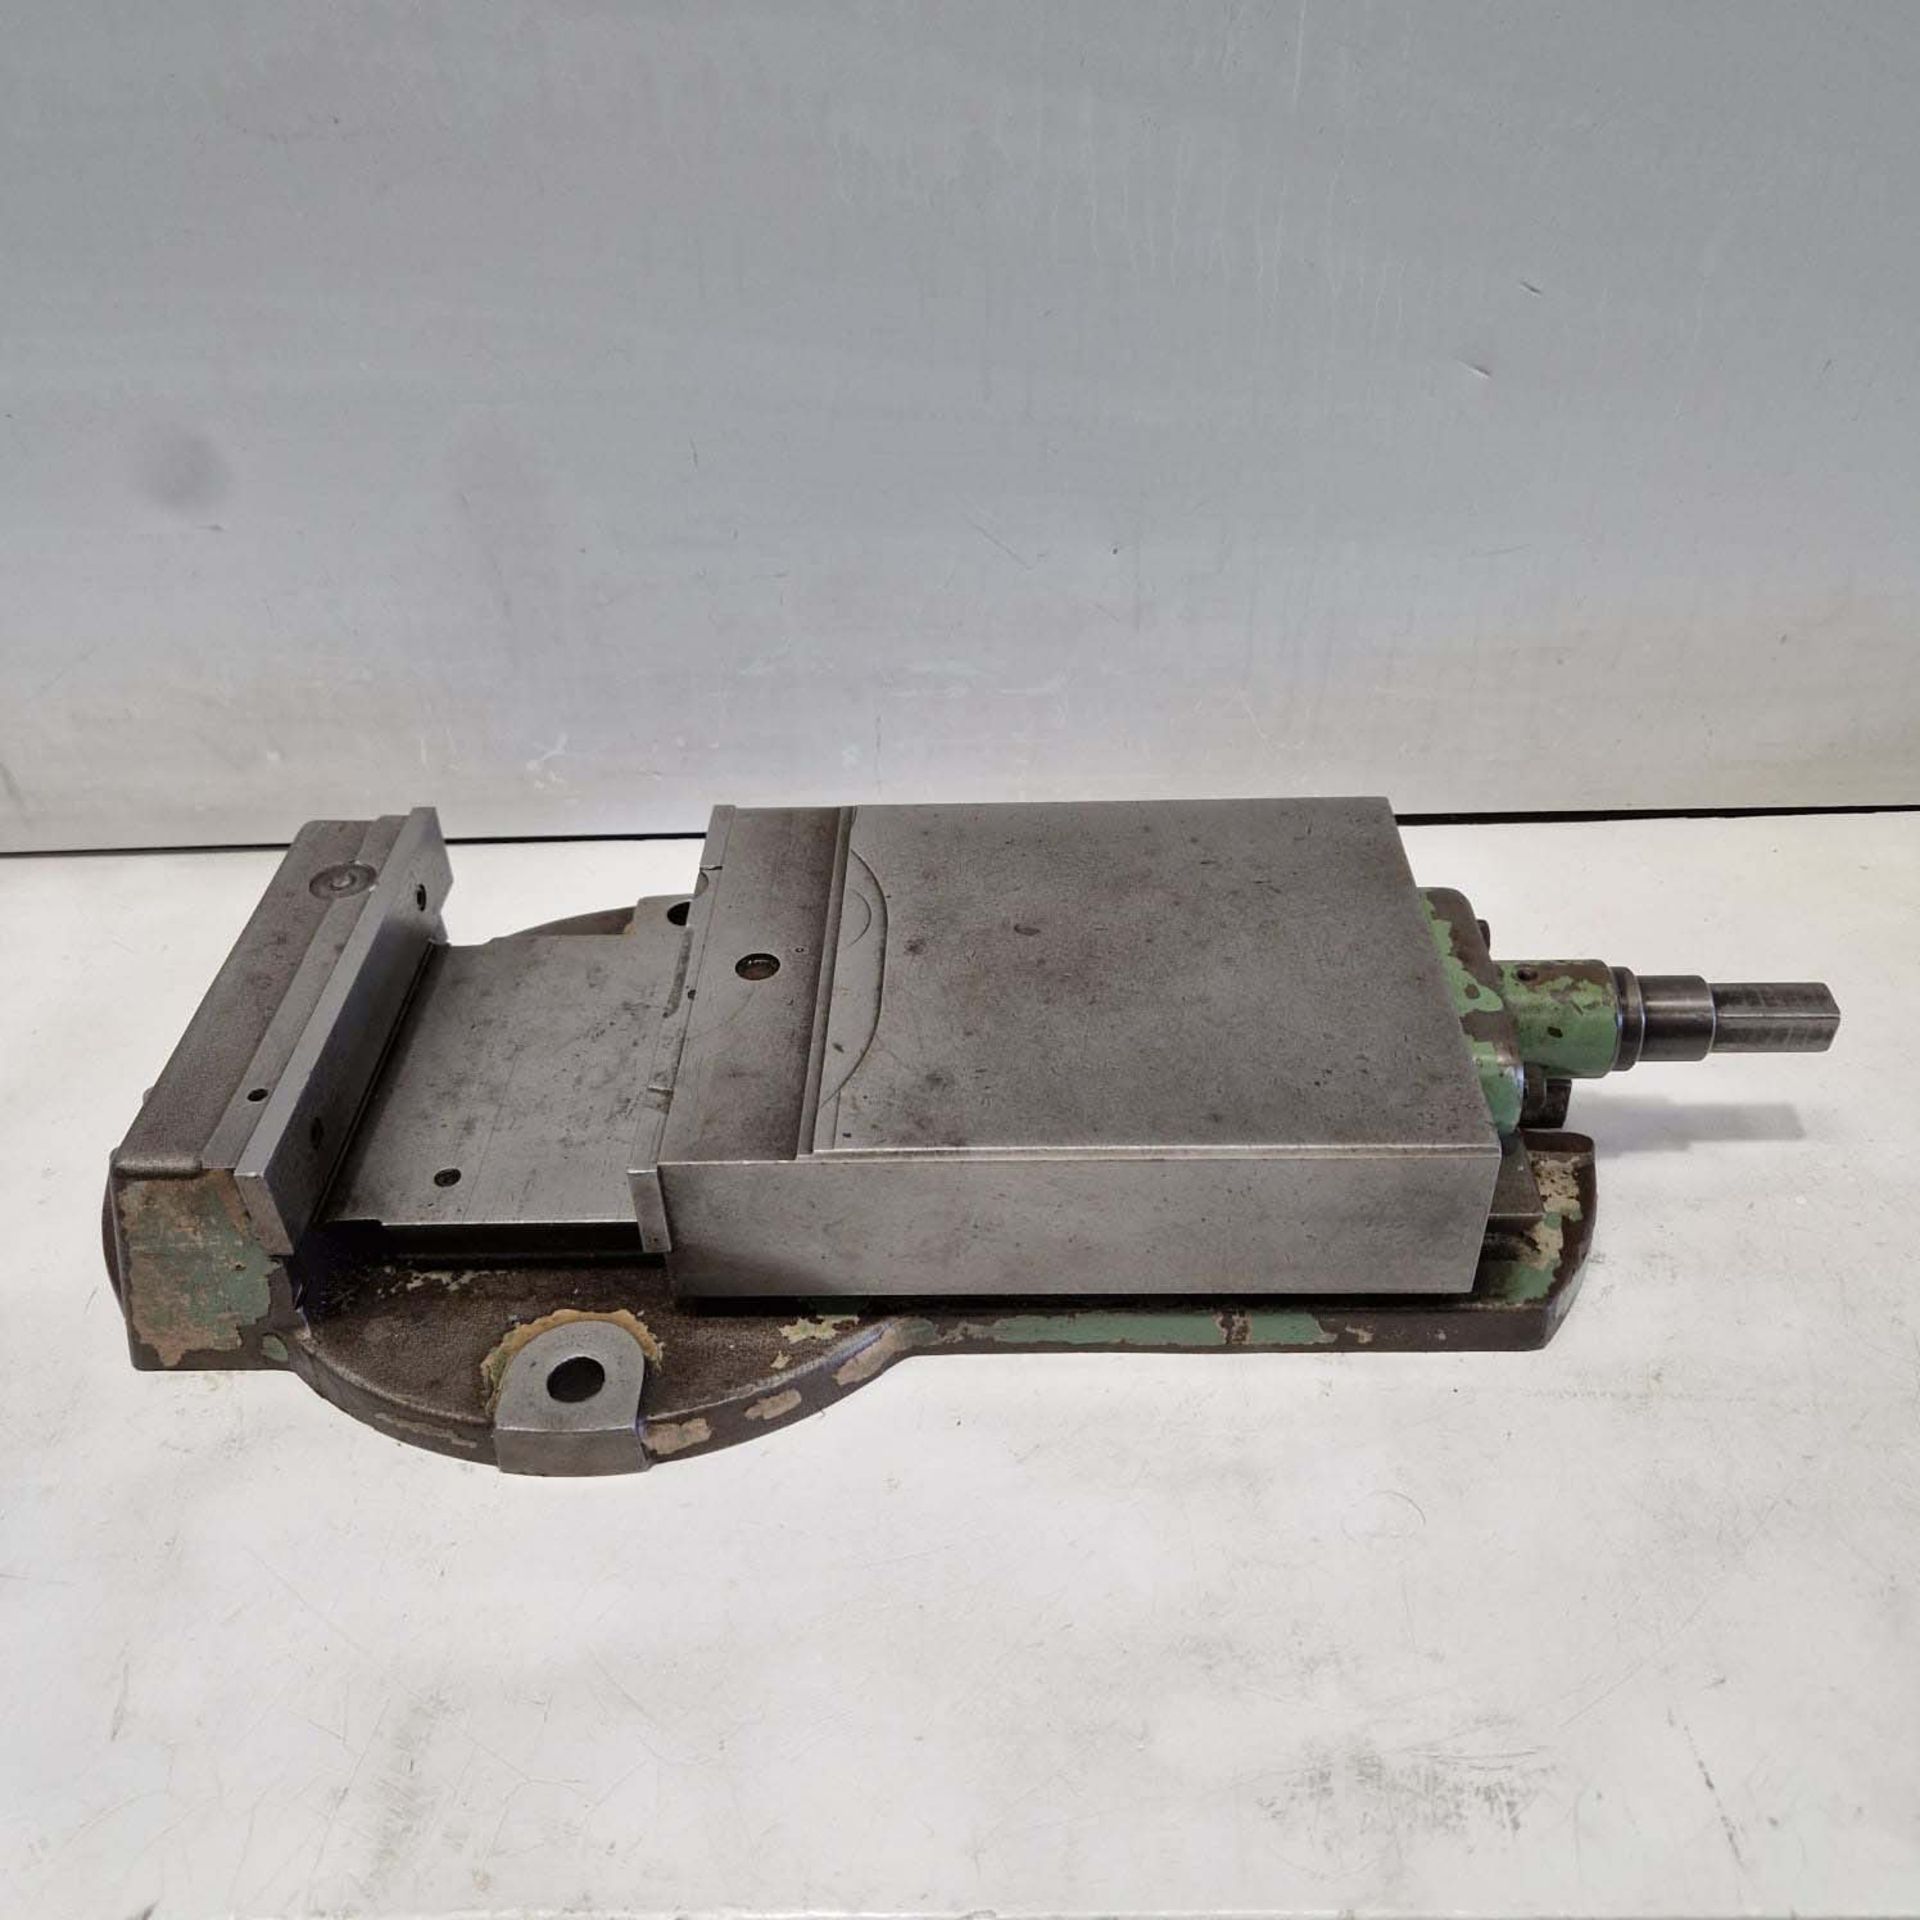 Abwood 6" Machine Vice. Width of Jaws 6 1/2". Height of Jaws 1 3/4". Max Opening of Jaws 6". - Image 2 of 7